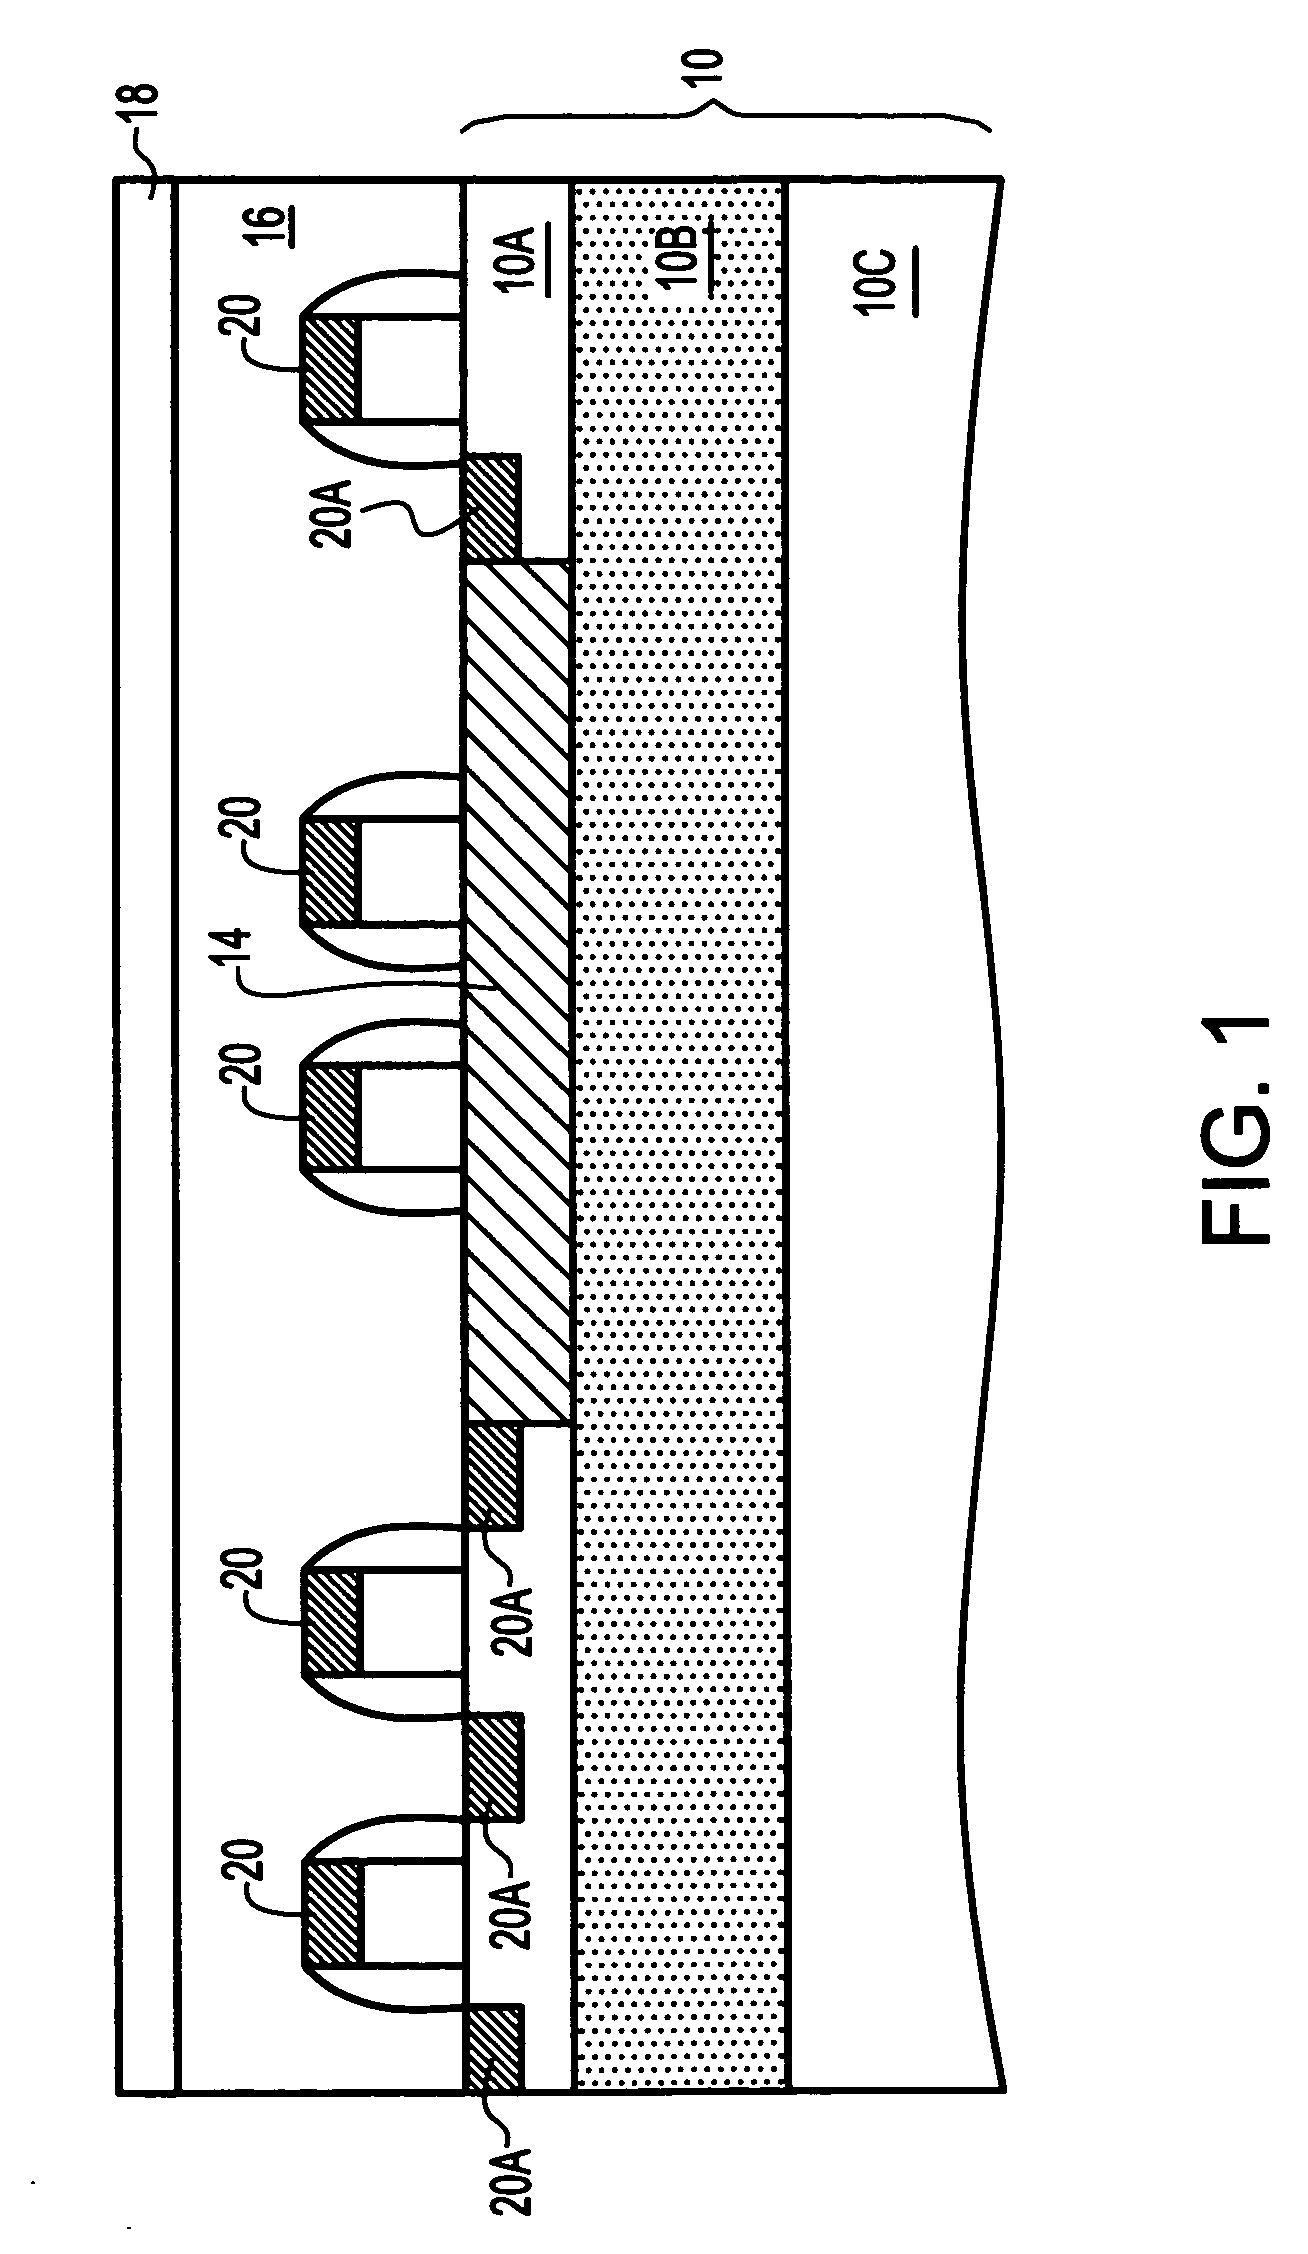 Trench metal-insulator-metal (MIM) capacitors integrated with middle-of-line metal contacts, and method of fabricating same